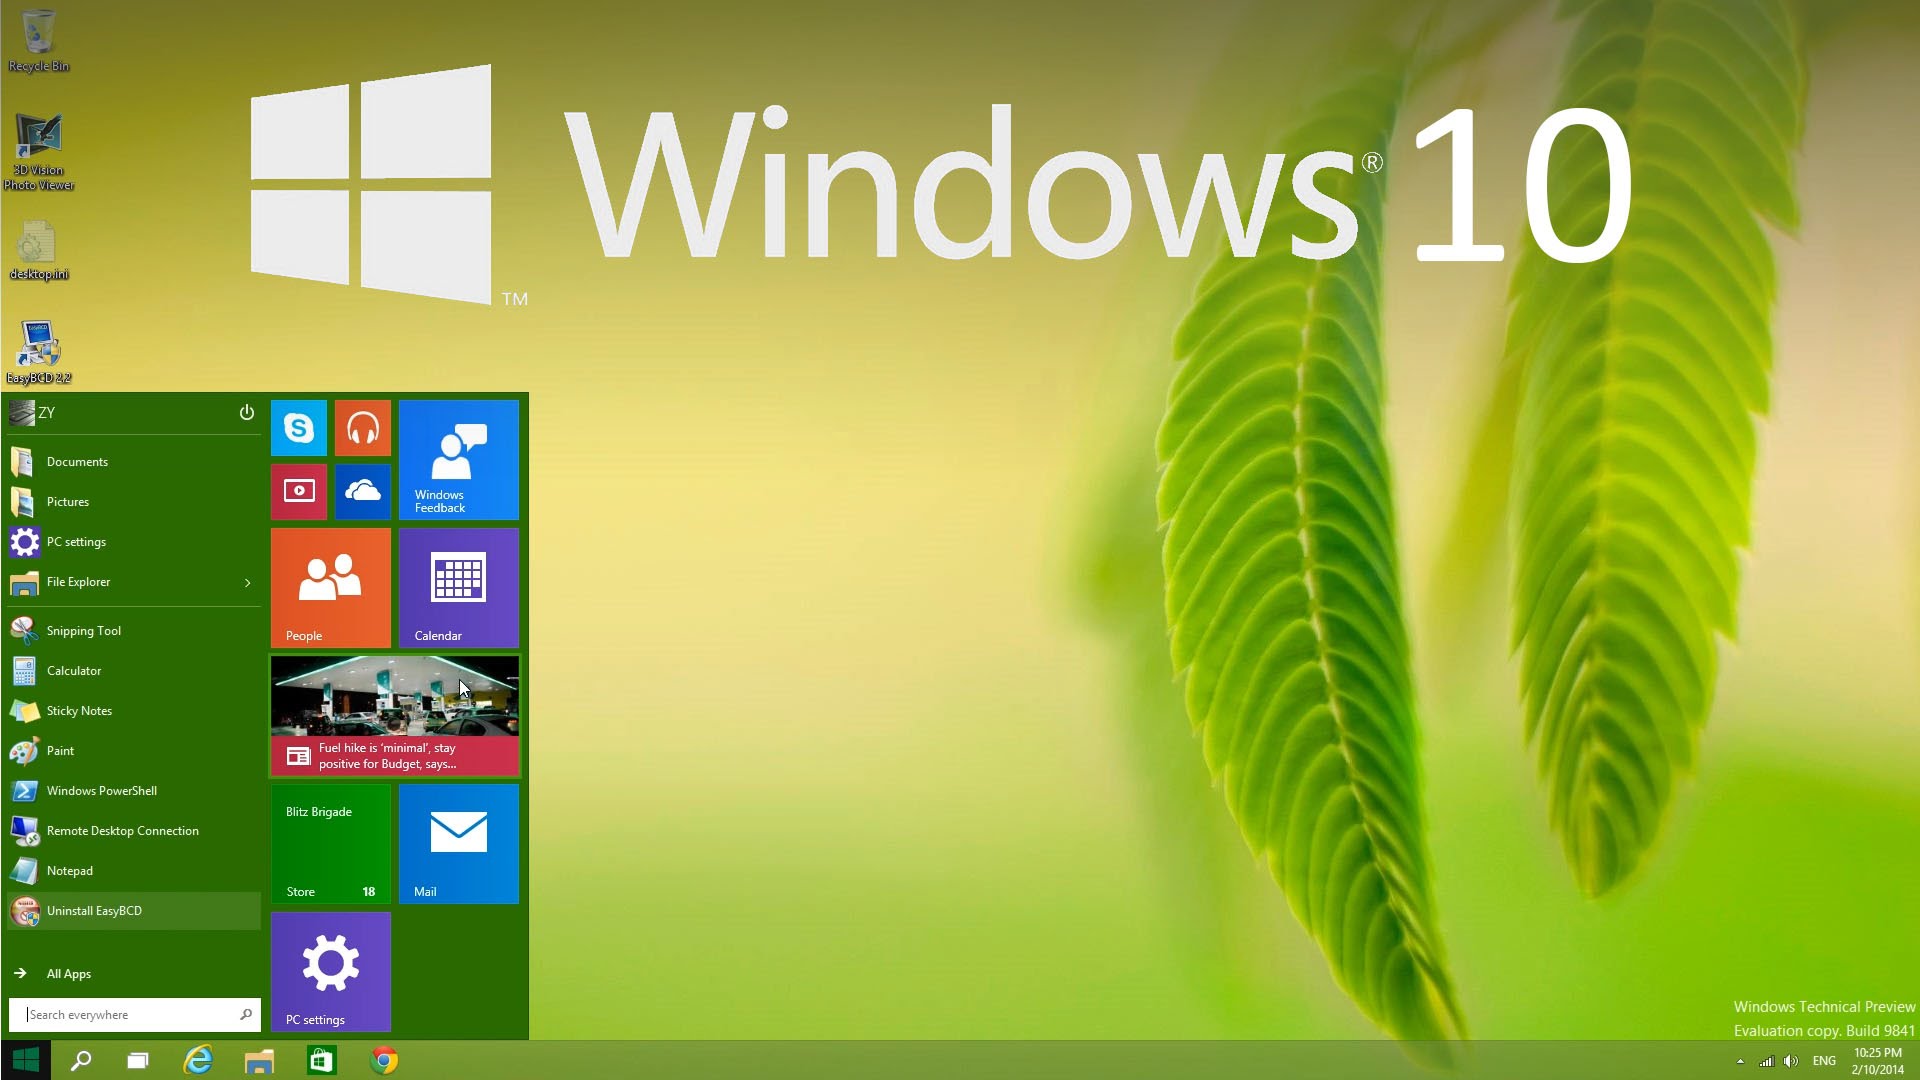 How To Change The Windows 10 Log In Screen Background To A Solid Color